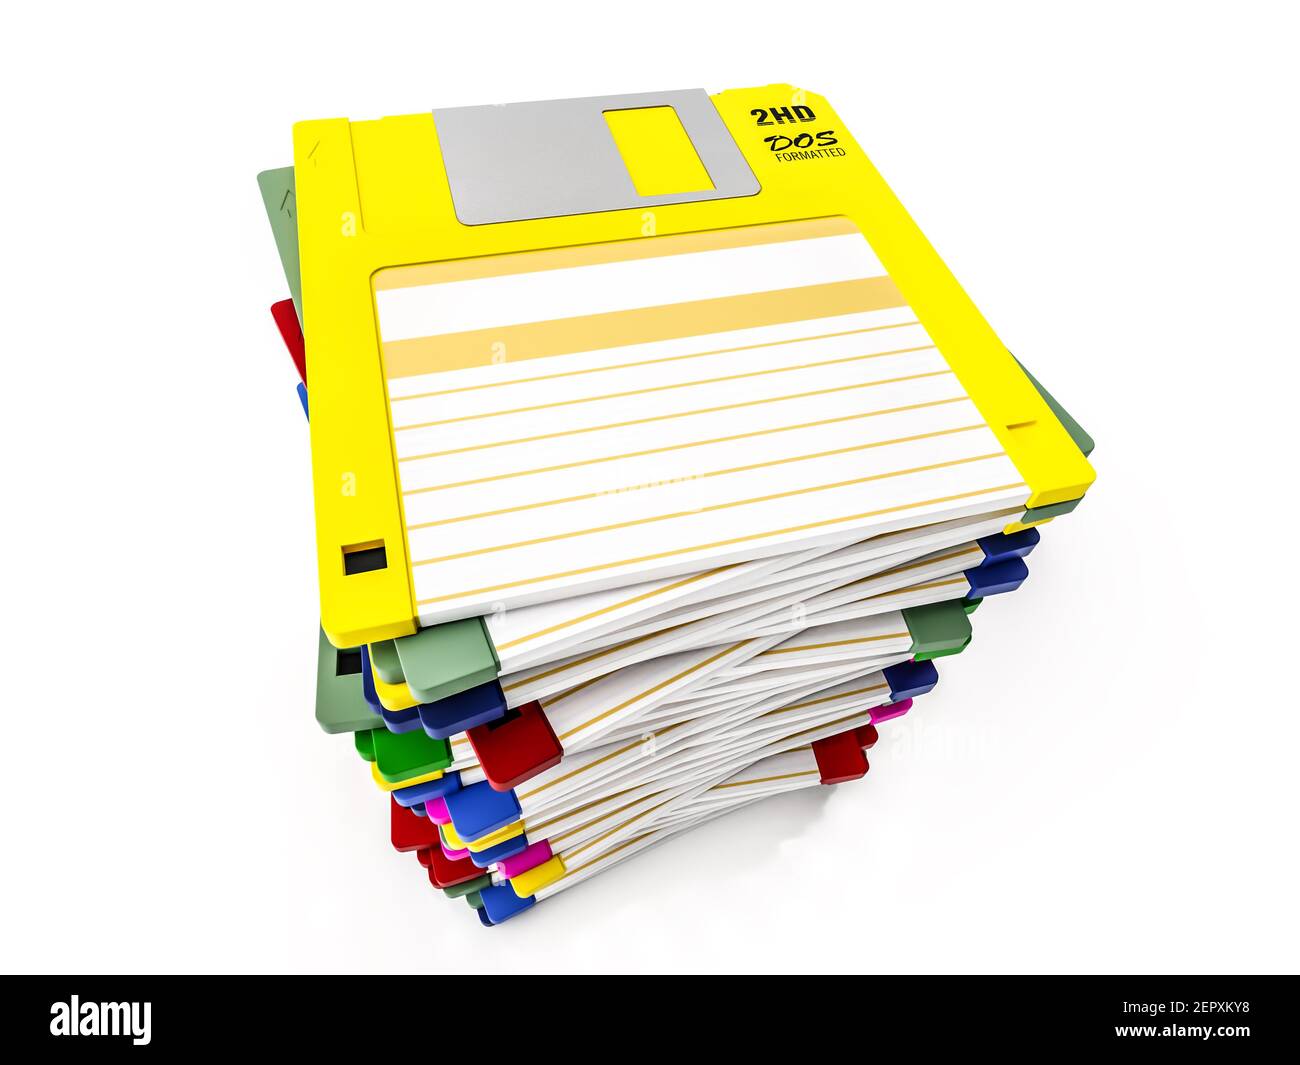 Pile of colorful floppy disks on white background Stock Photo